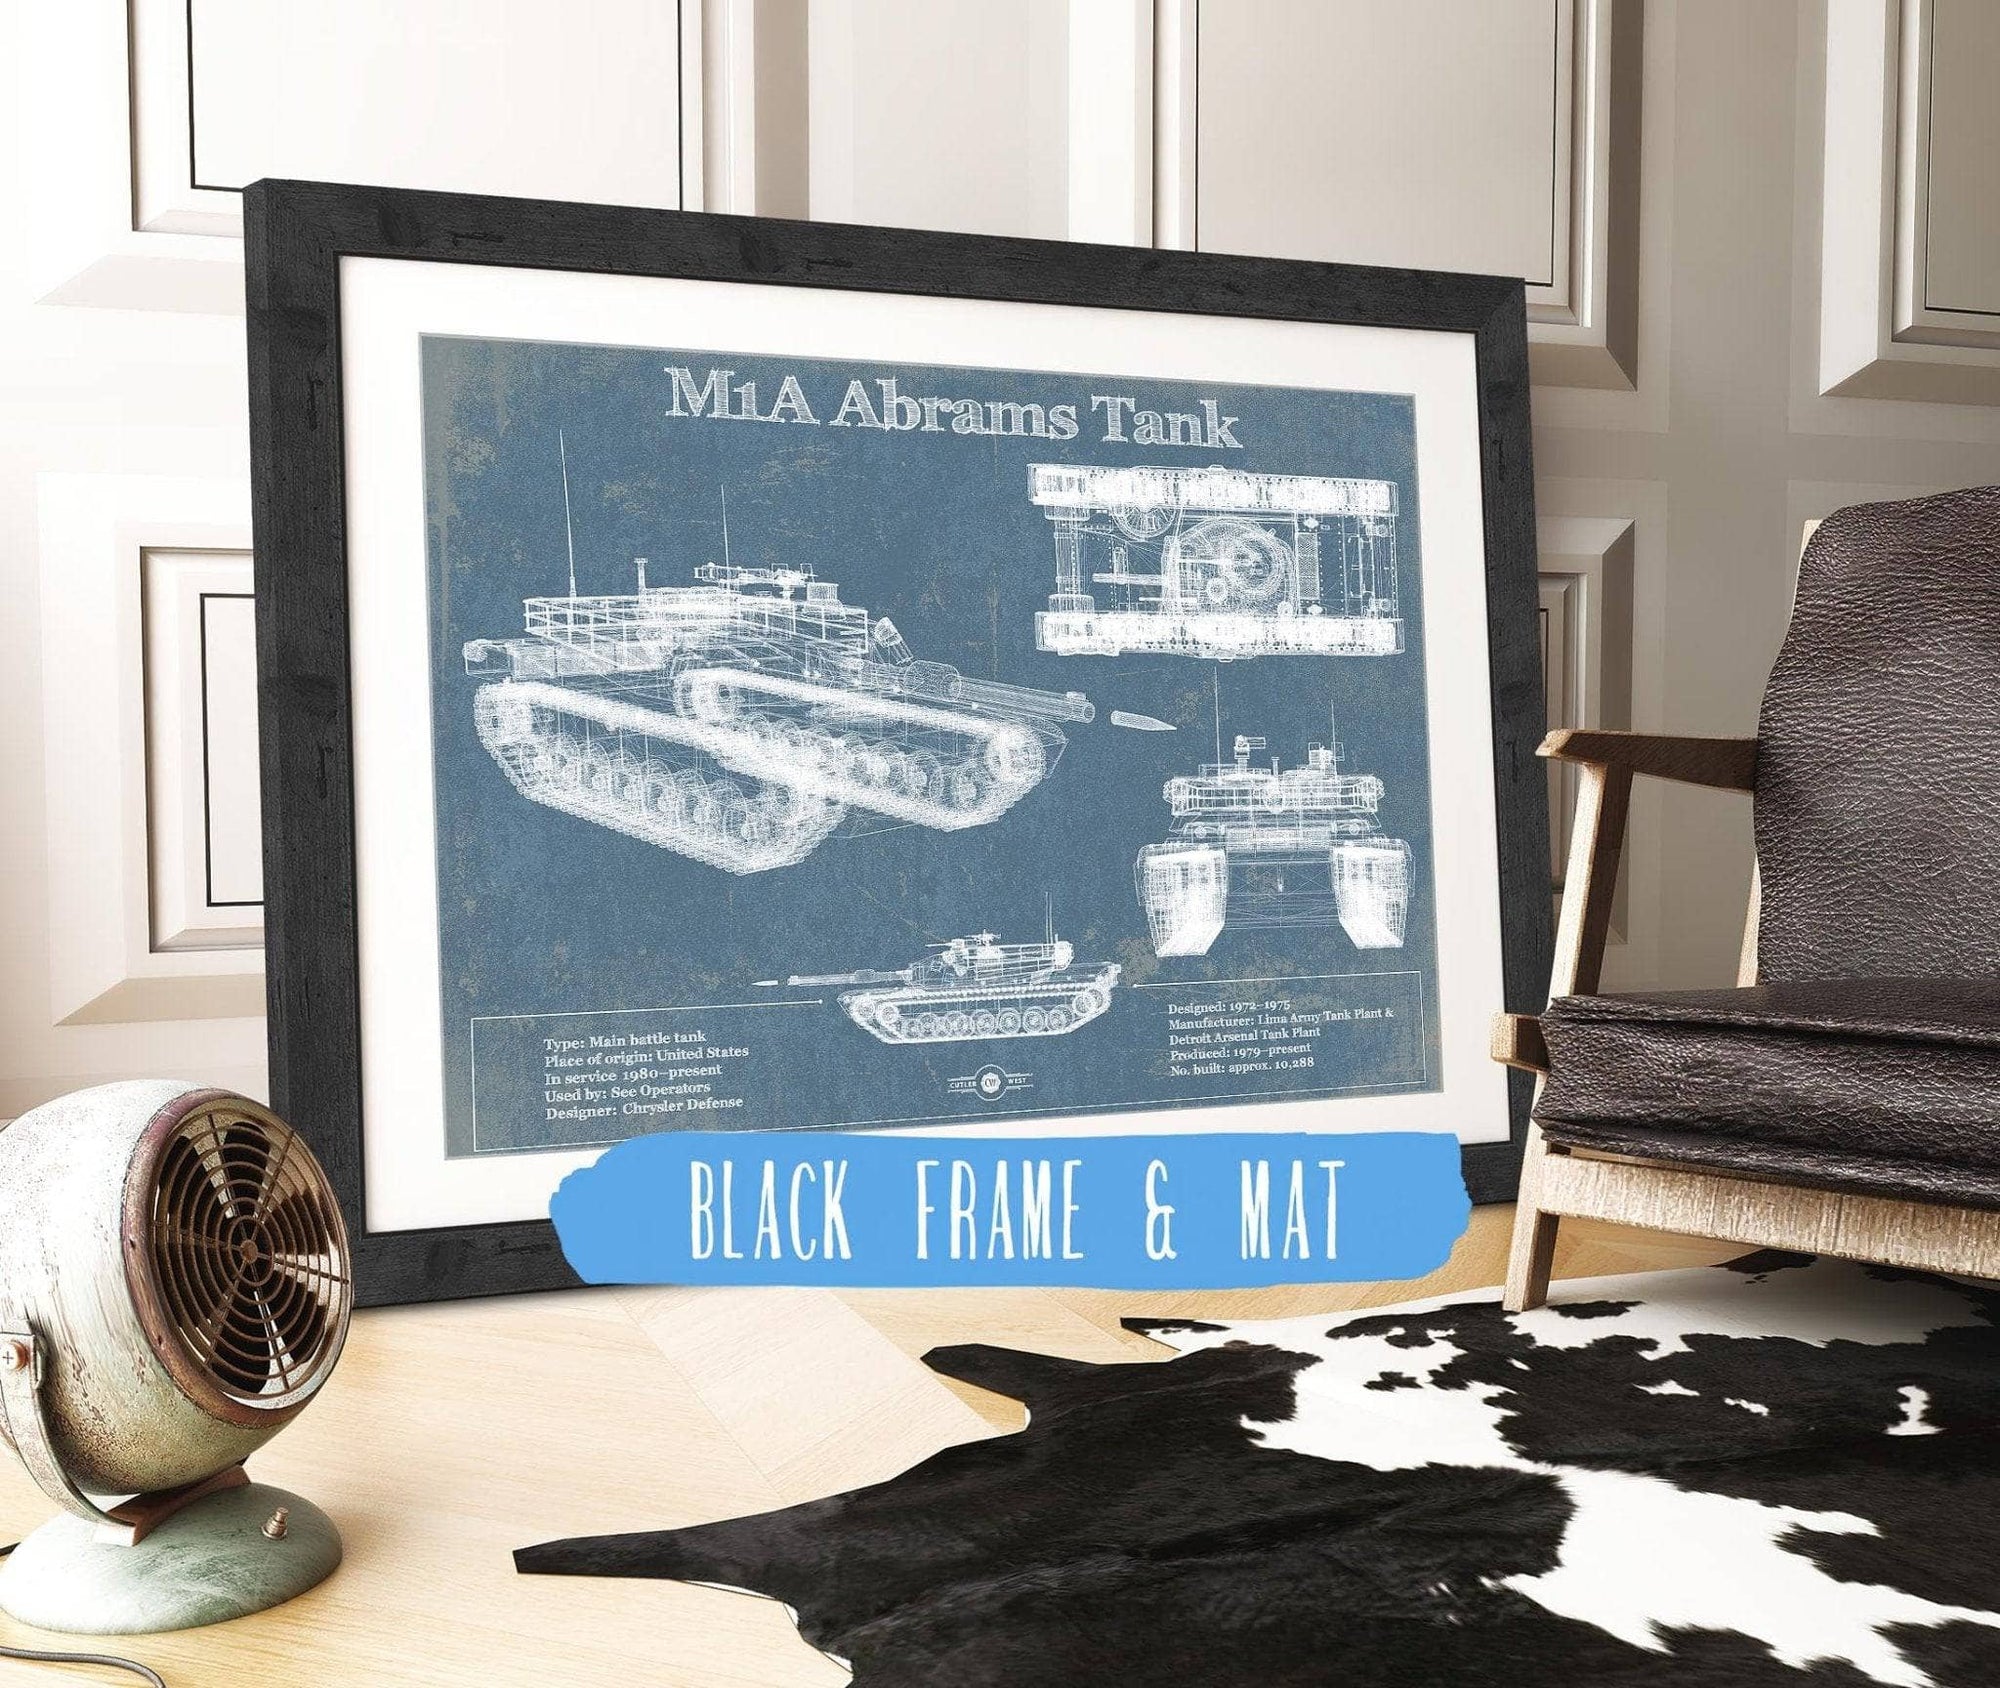 Cutler West Military Weapons Collection 14" x 11" / Black Frame & Mat M1A Abrams Tank Vintage Blueprint Print 891066671_18726